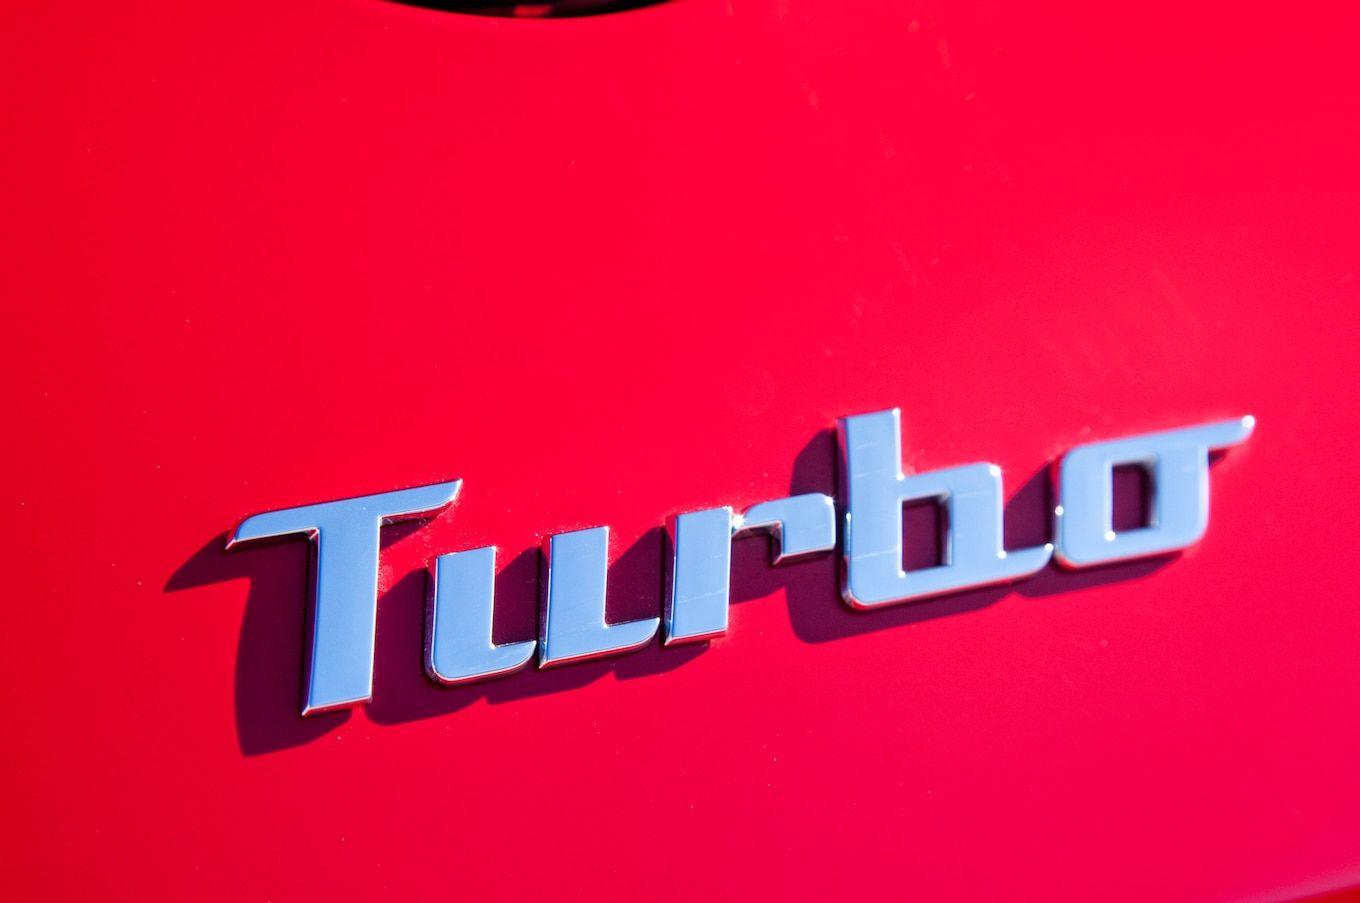 VW Turbo Logo - Volkswagen Beetle Reviews and Rating